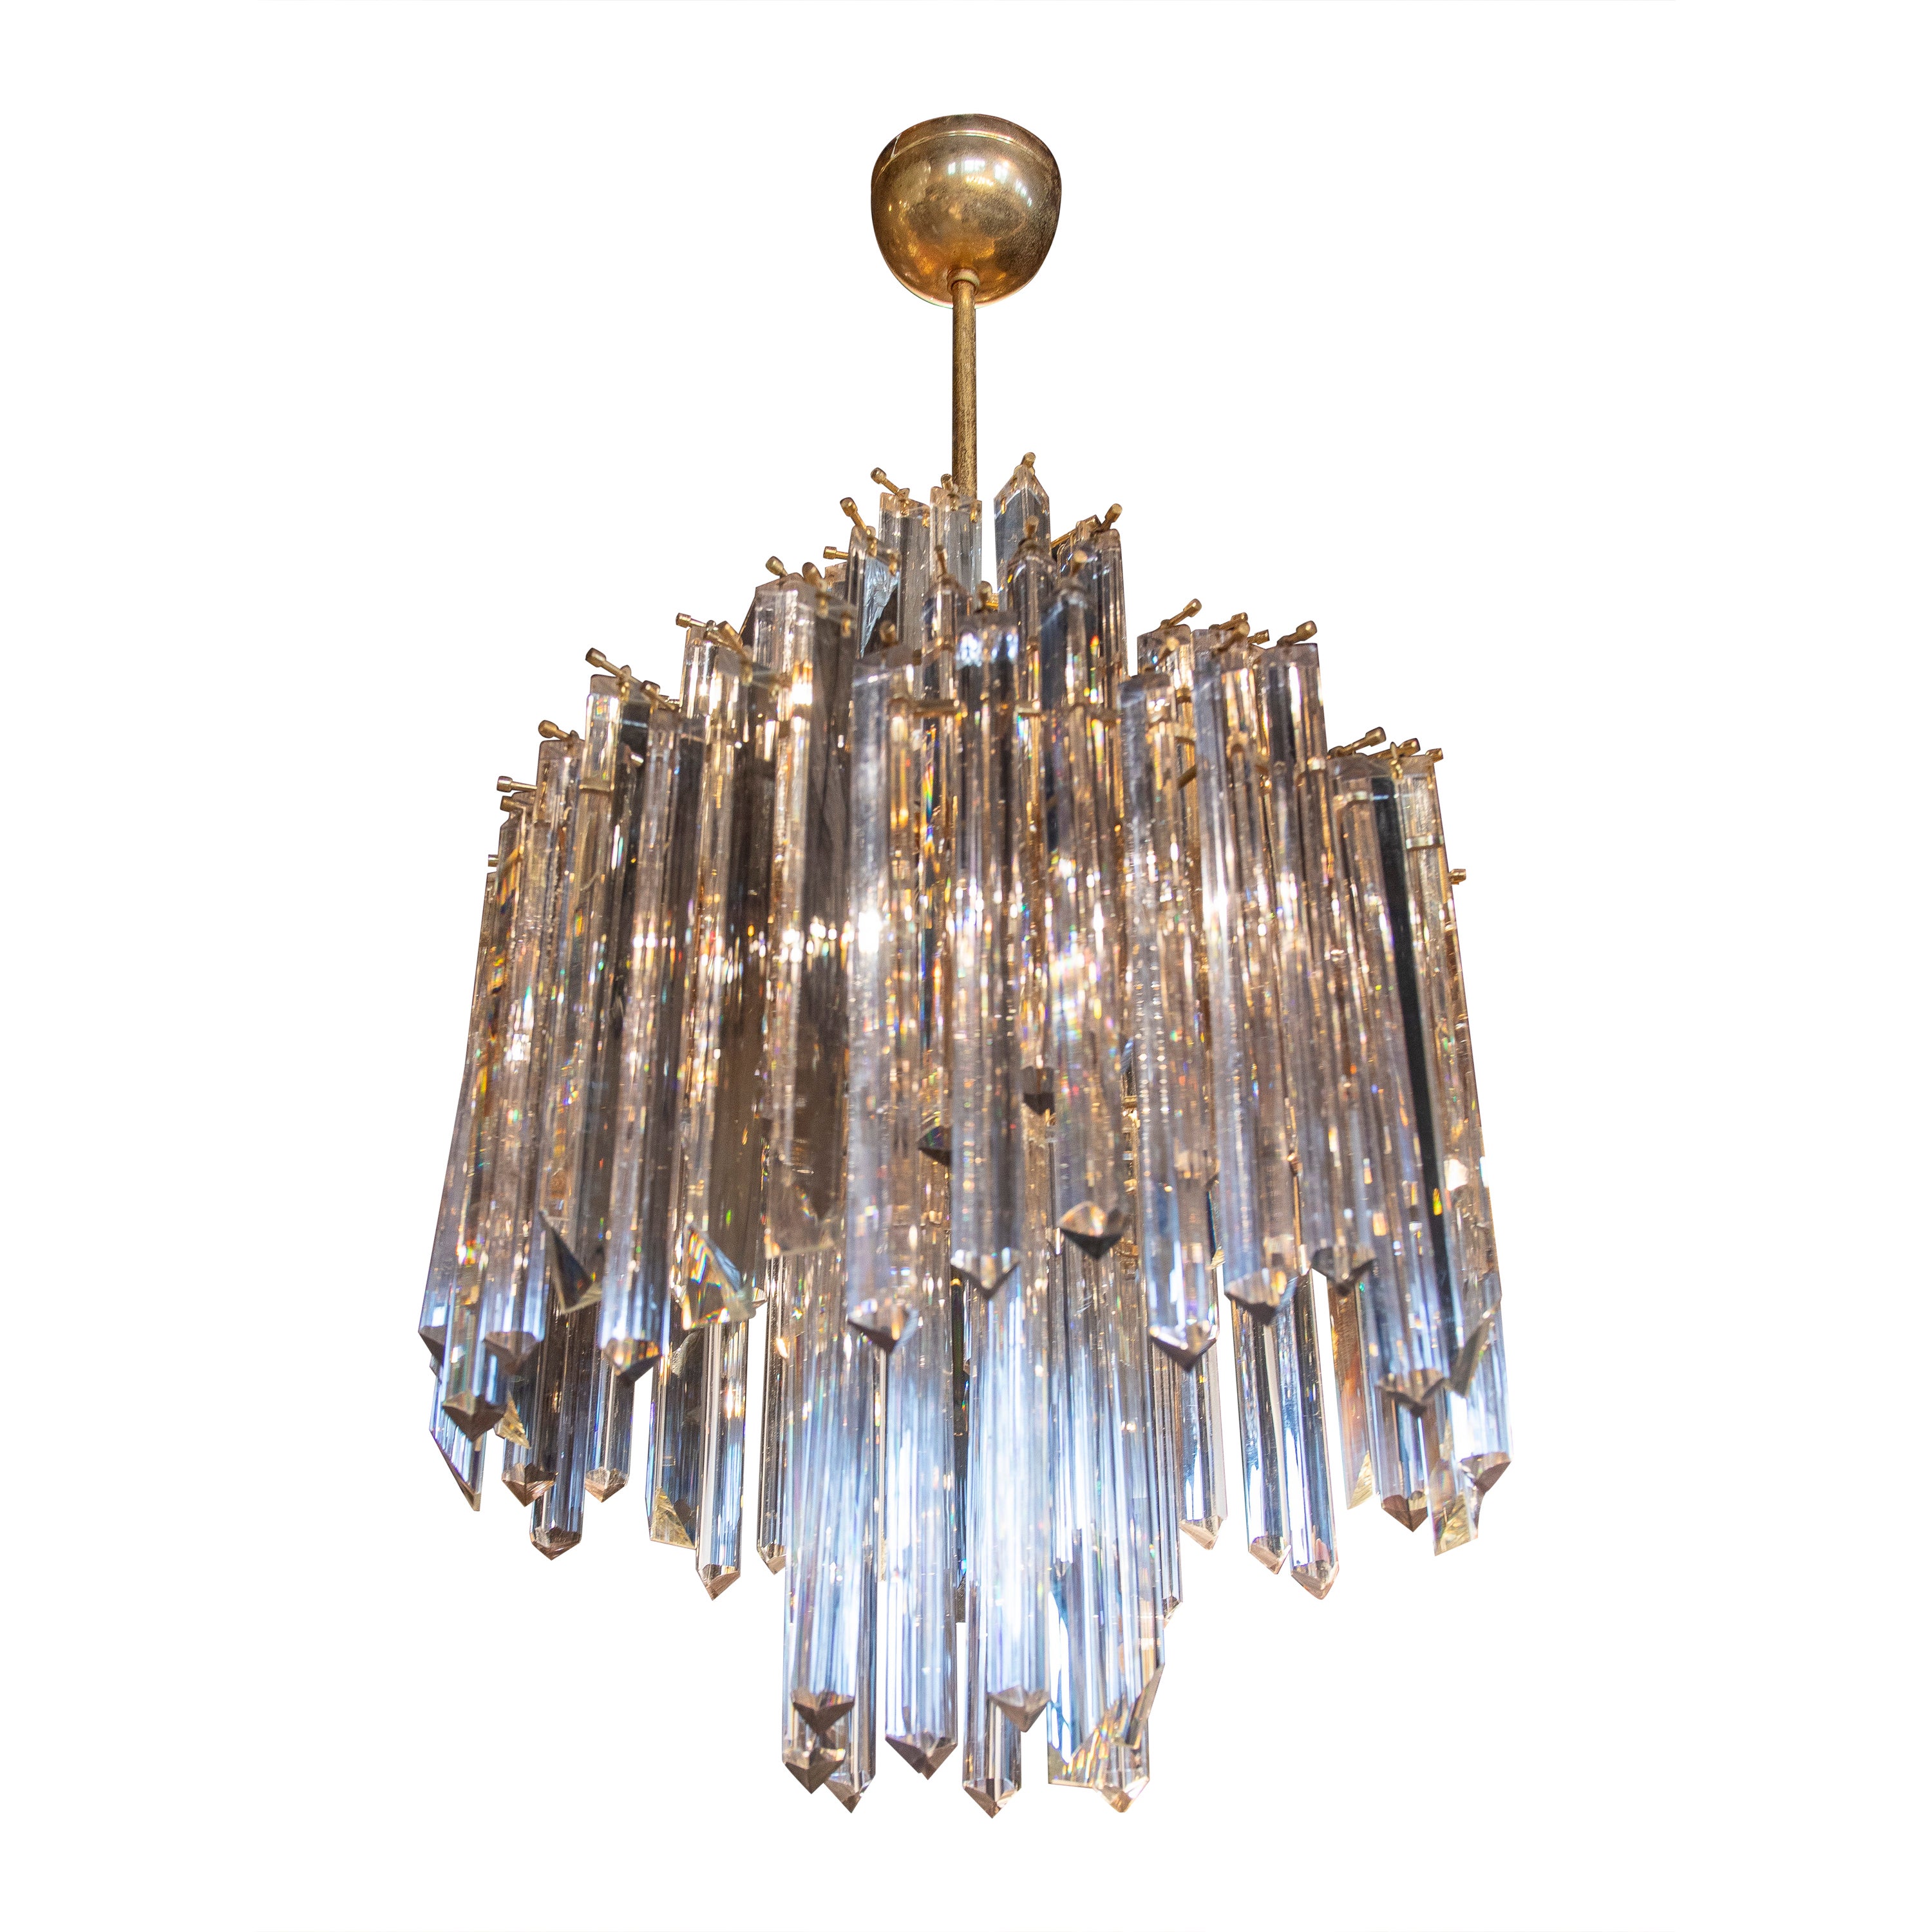 Italian Lamp Composed of Elongated Crystals and Gilded Metal Structure